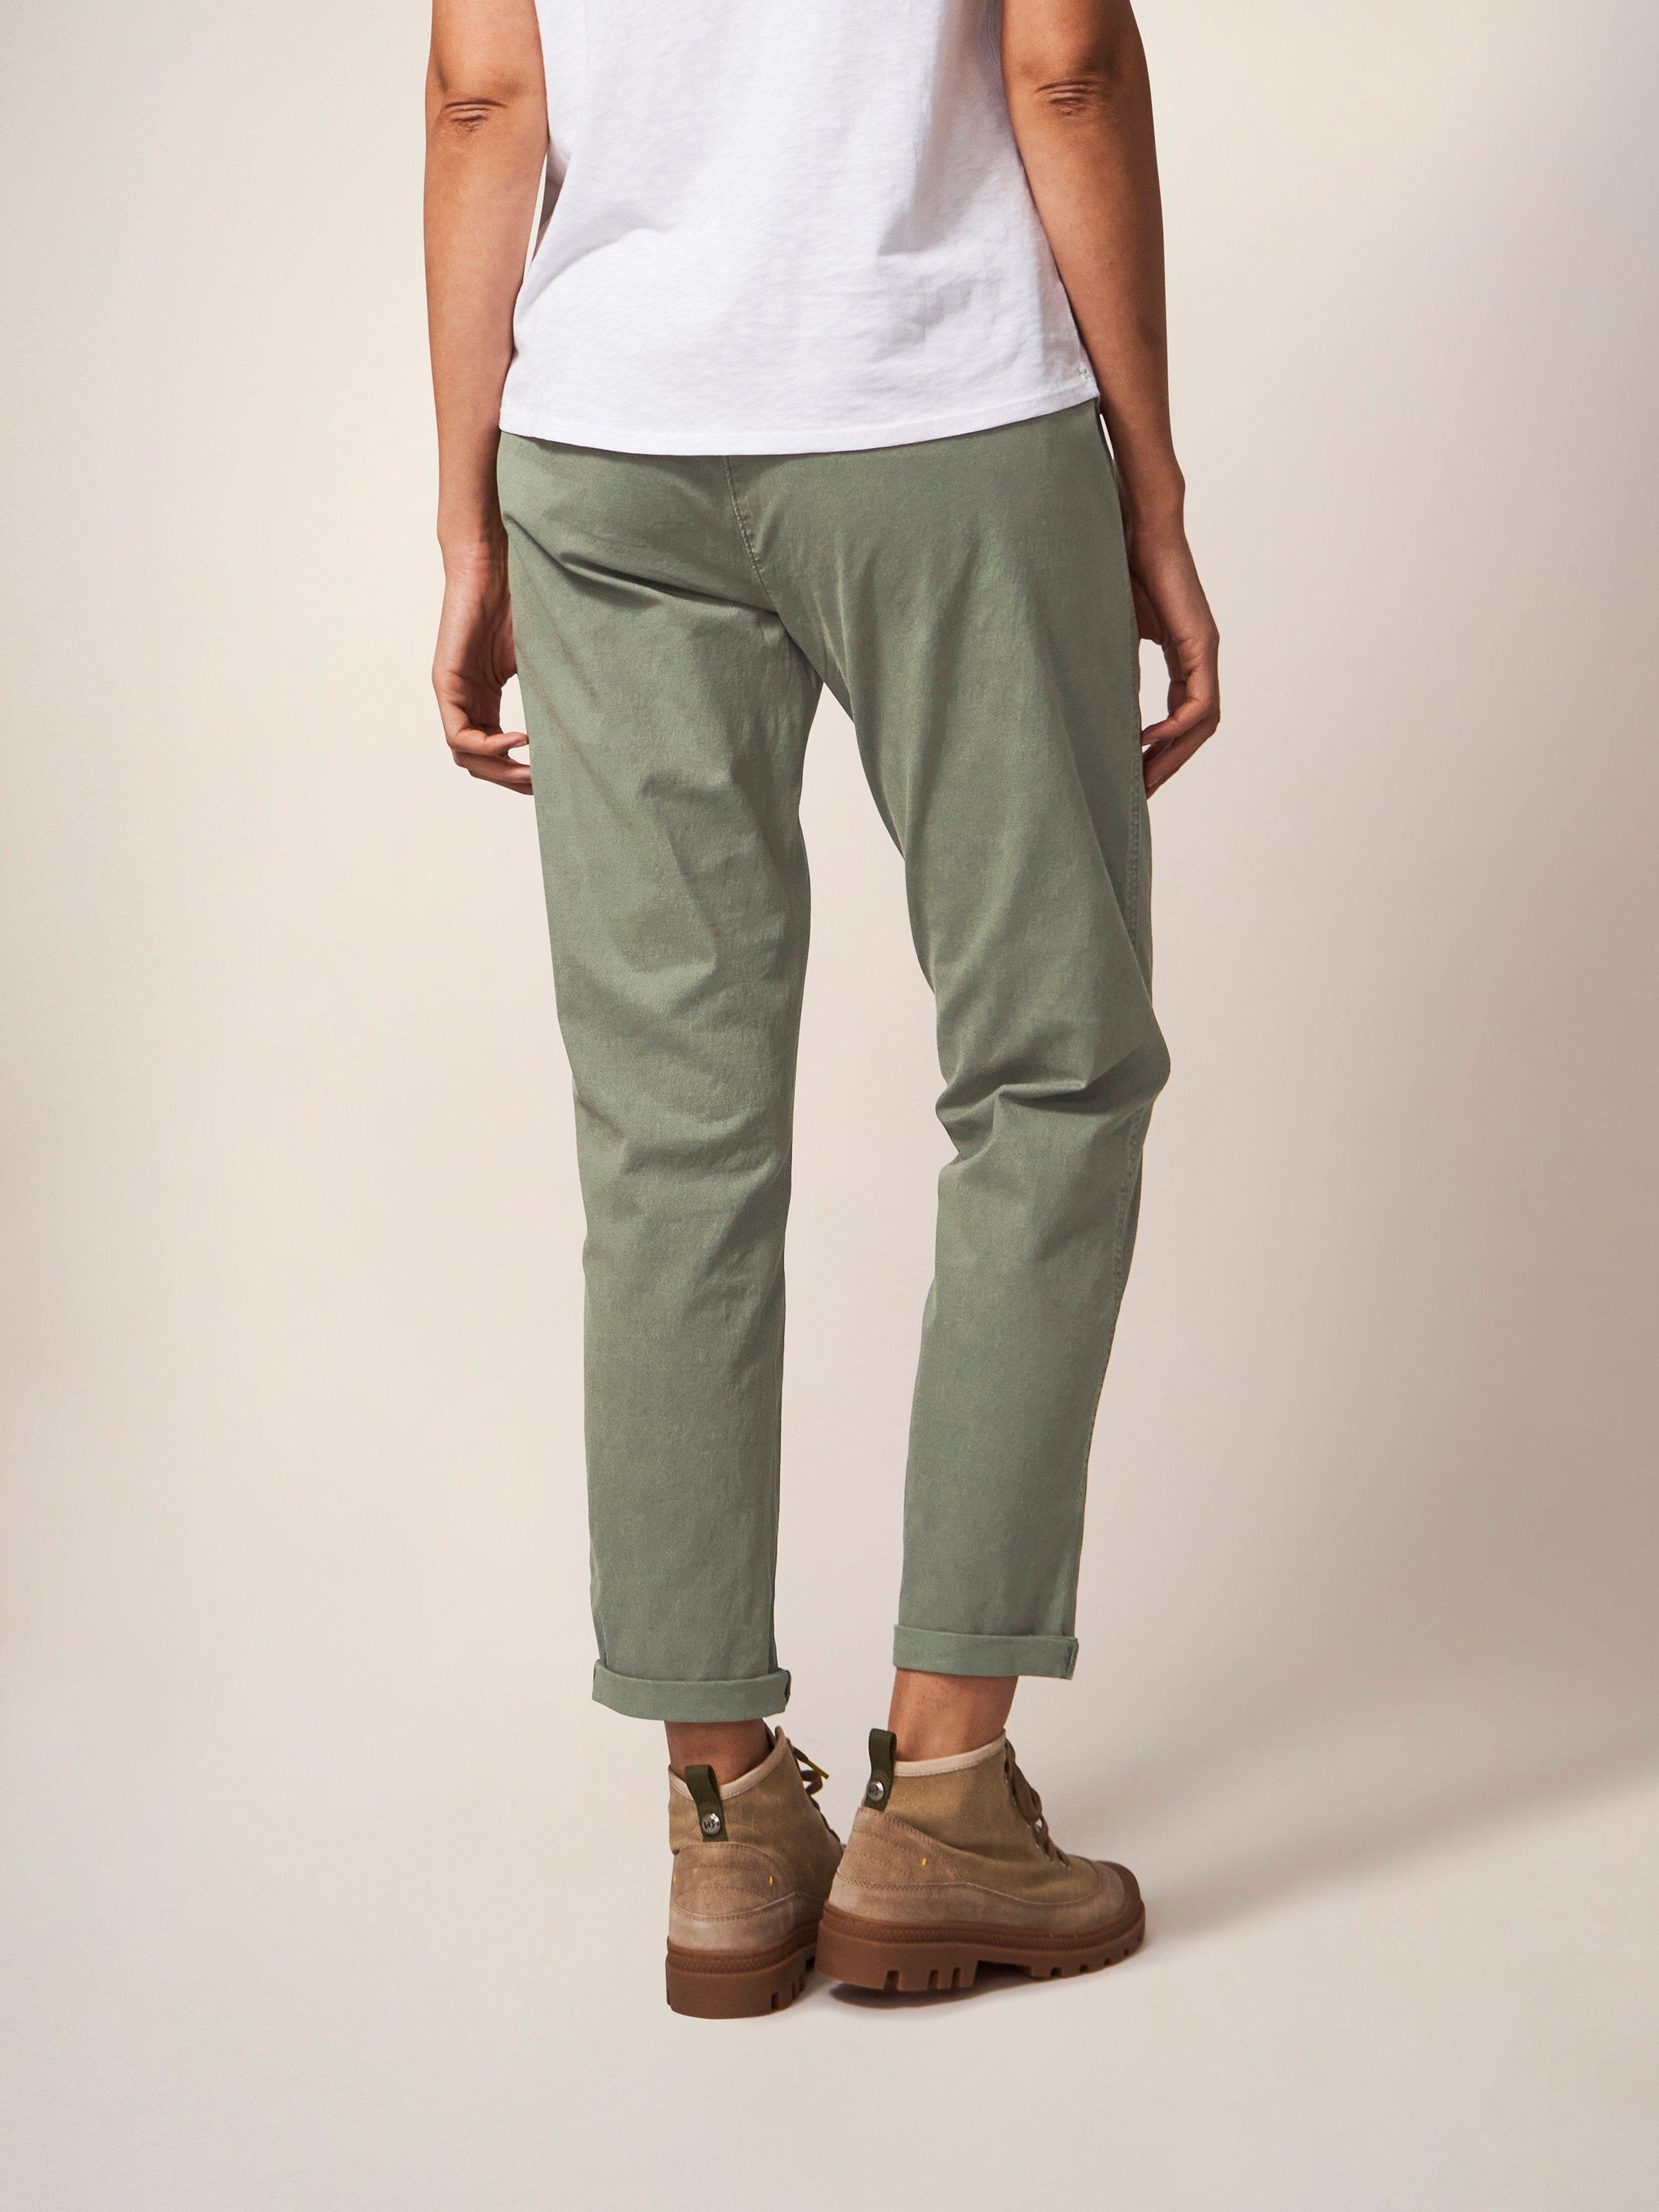 Twister Chino in MID GREEN - MODEL BACK